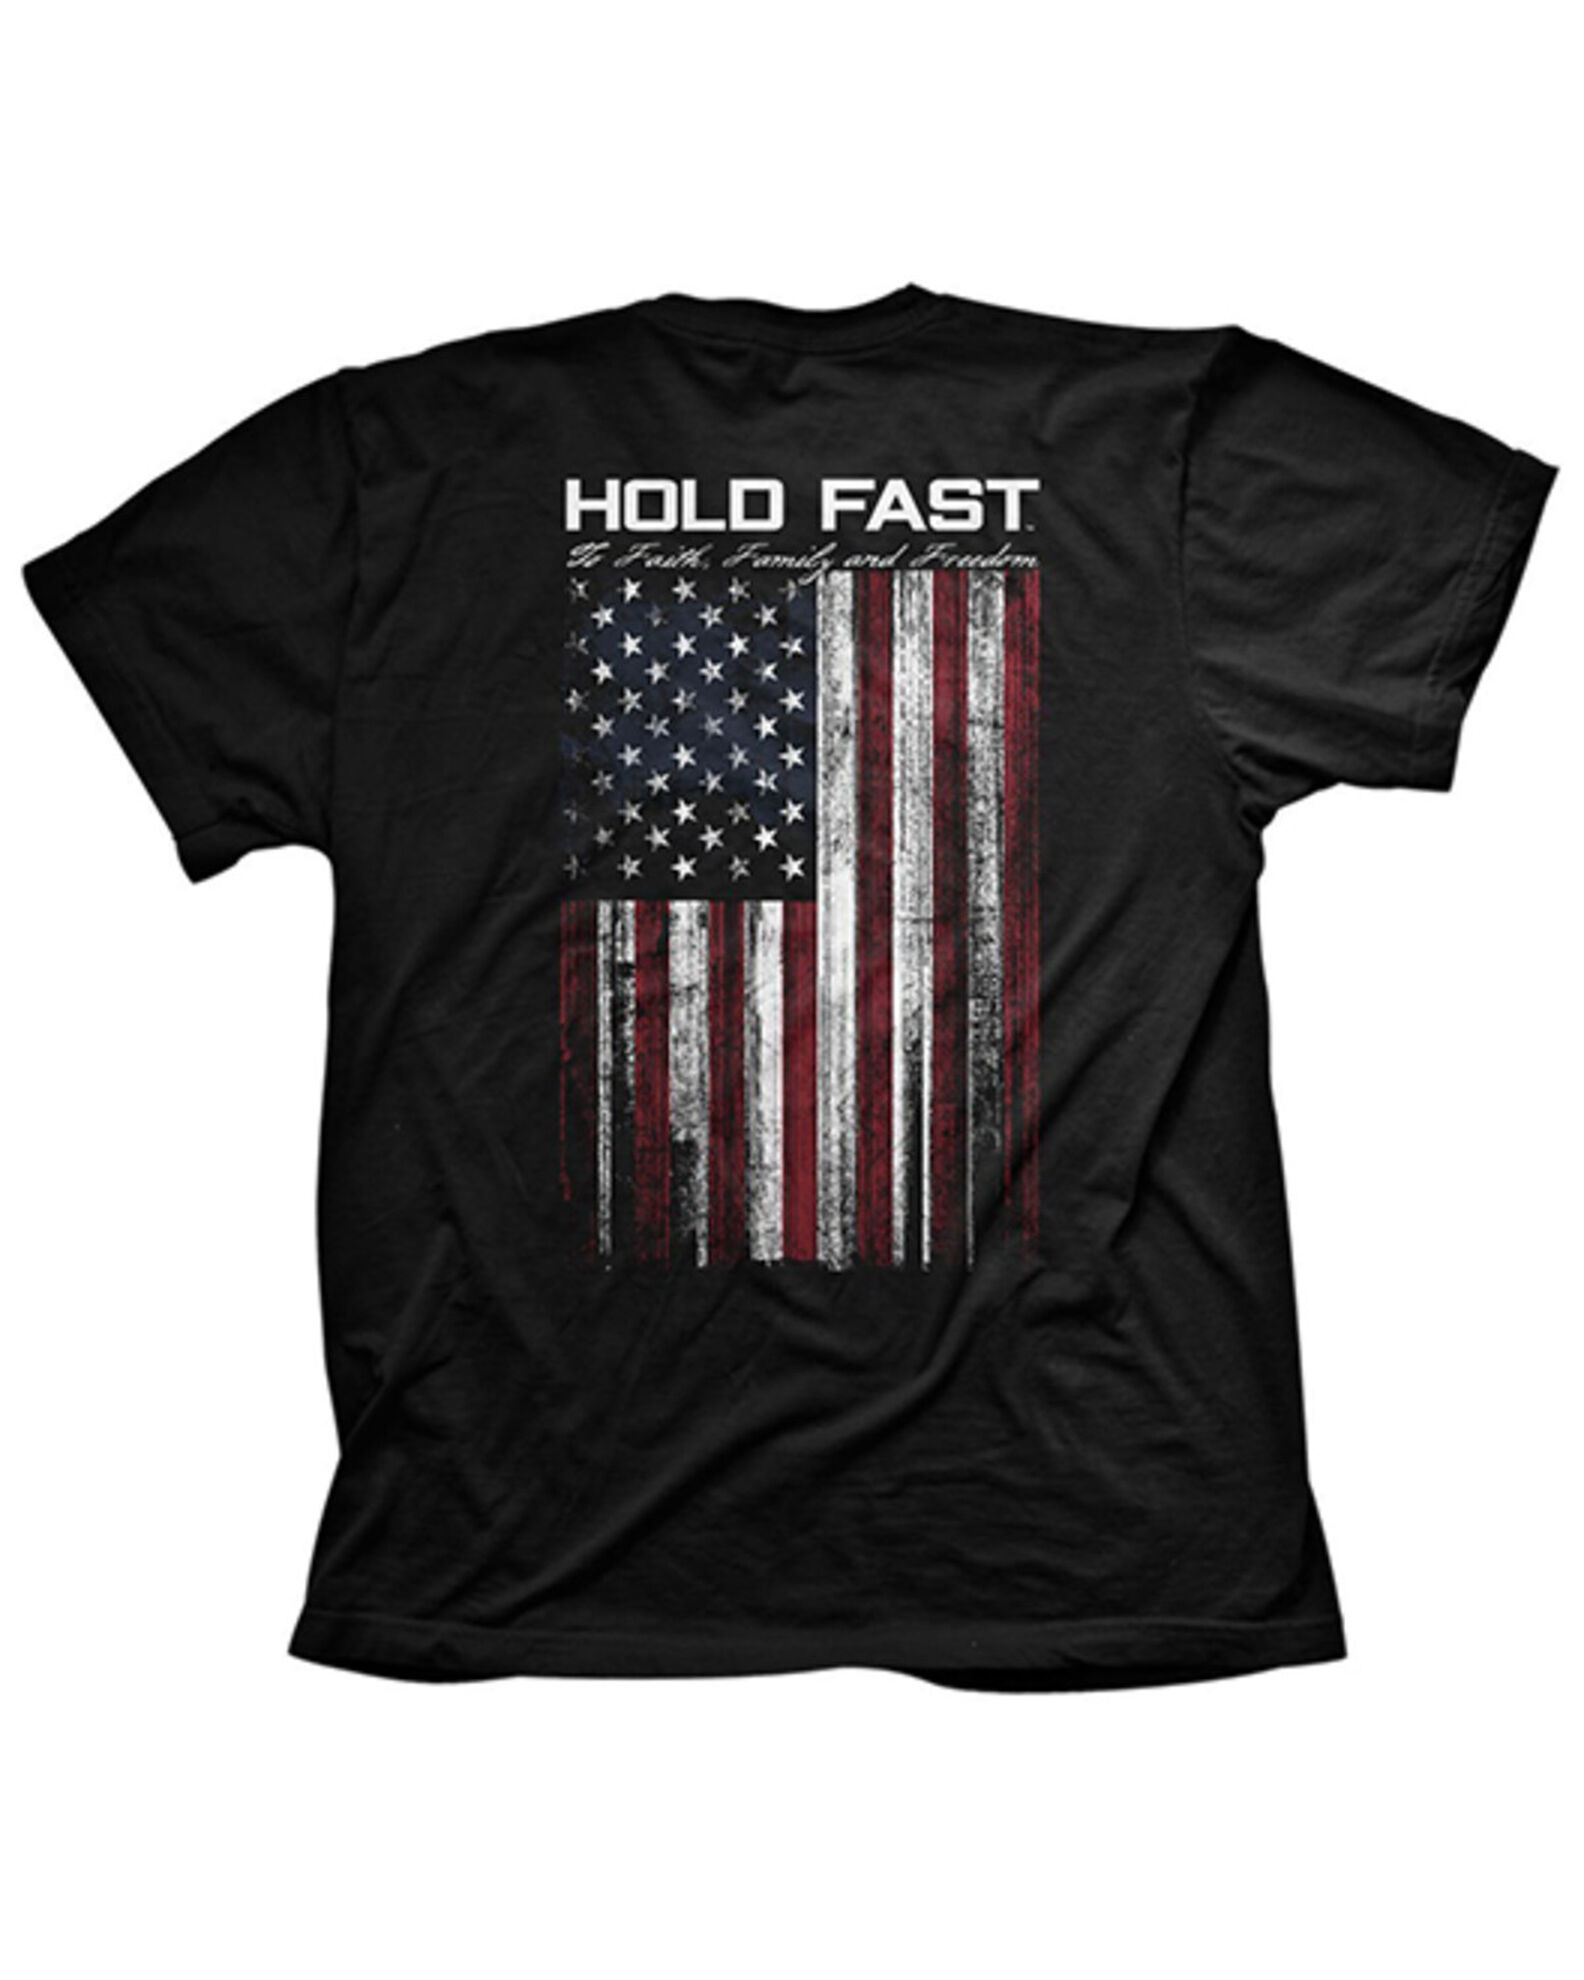 Hold Fast Men's Black Live Free Eagle Graphic Short Sleeve T-Shirt